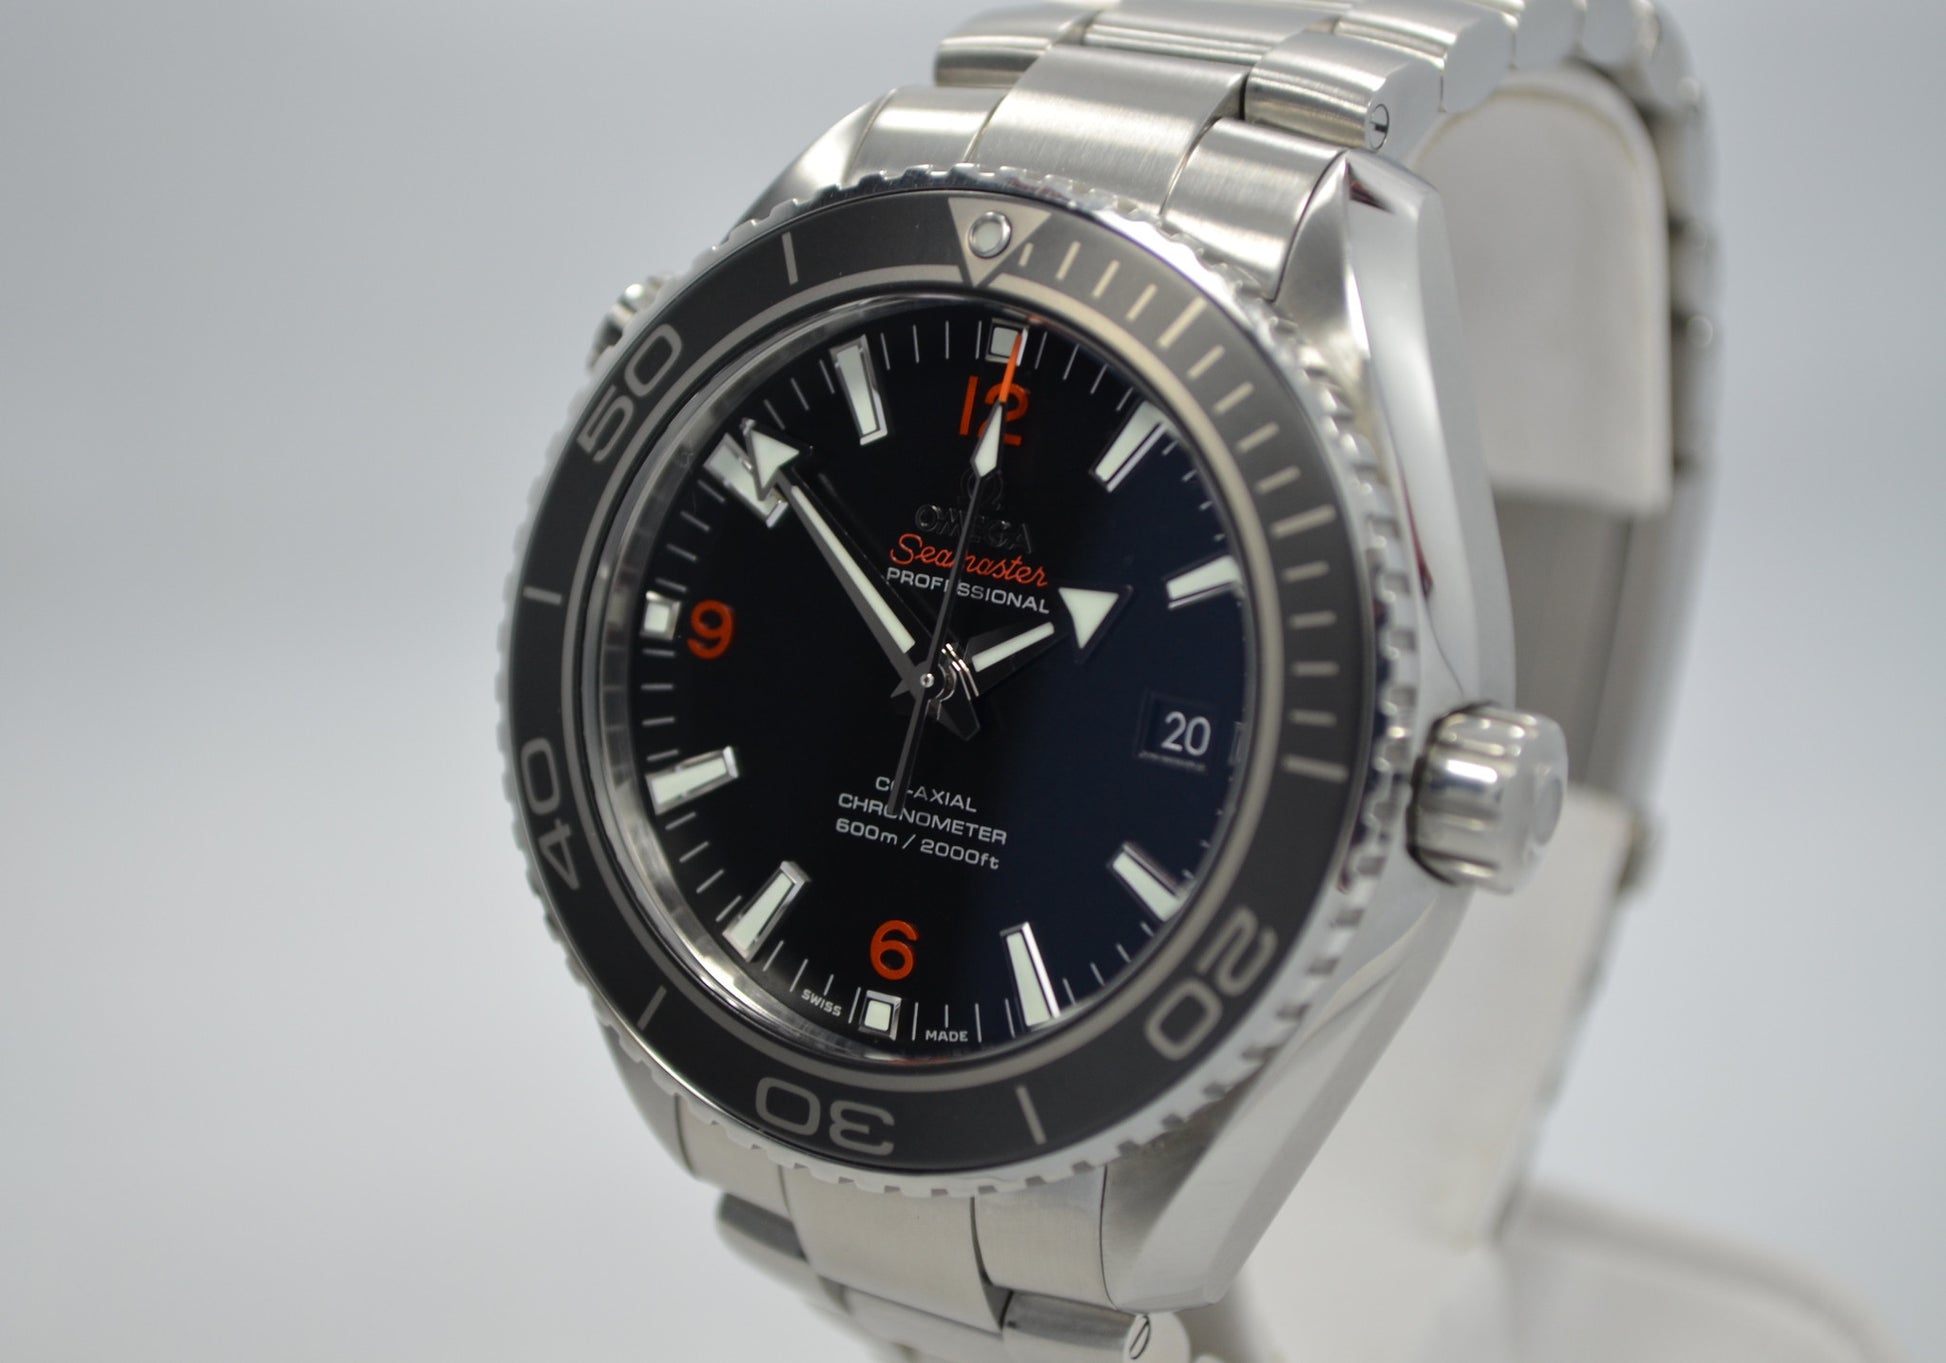 Omega 232.30.46.21.01.003 Seamaster Planet Ocean Professional 600M Master Co-Axial Watch - Hashtag Watch Company